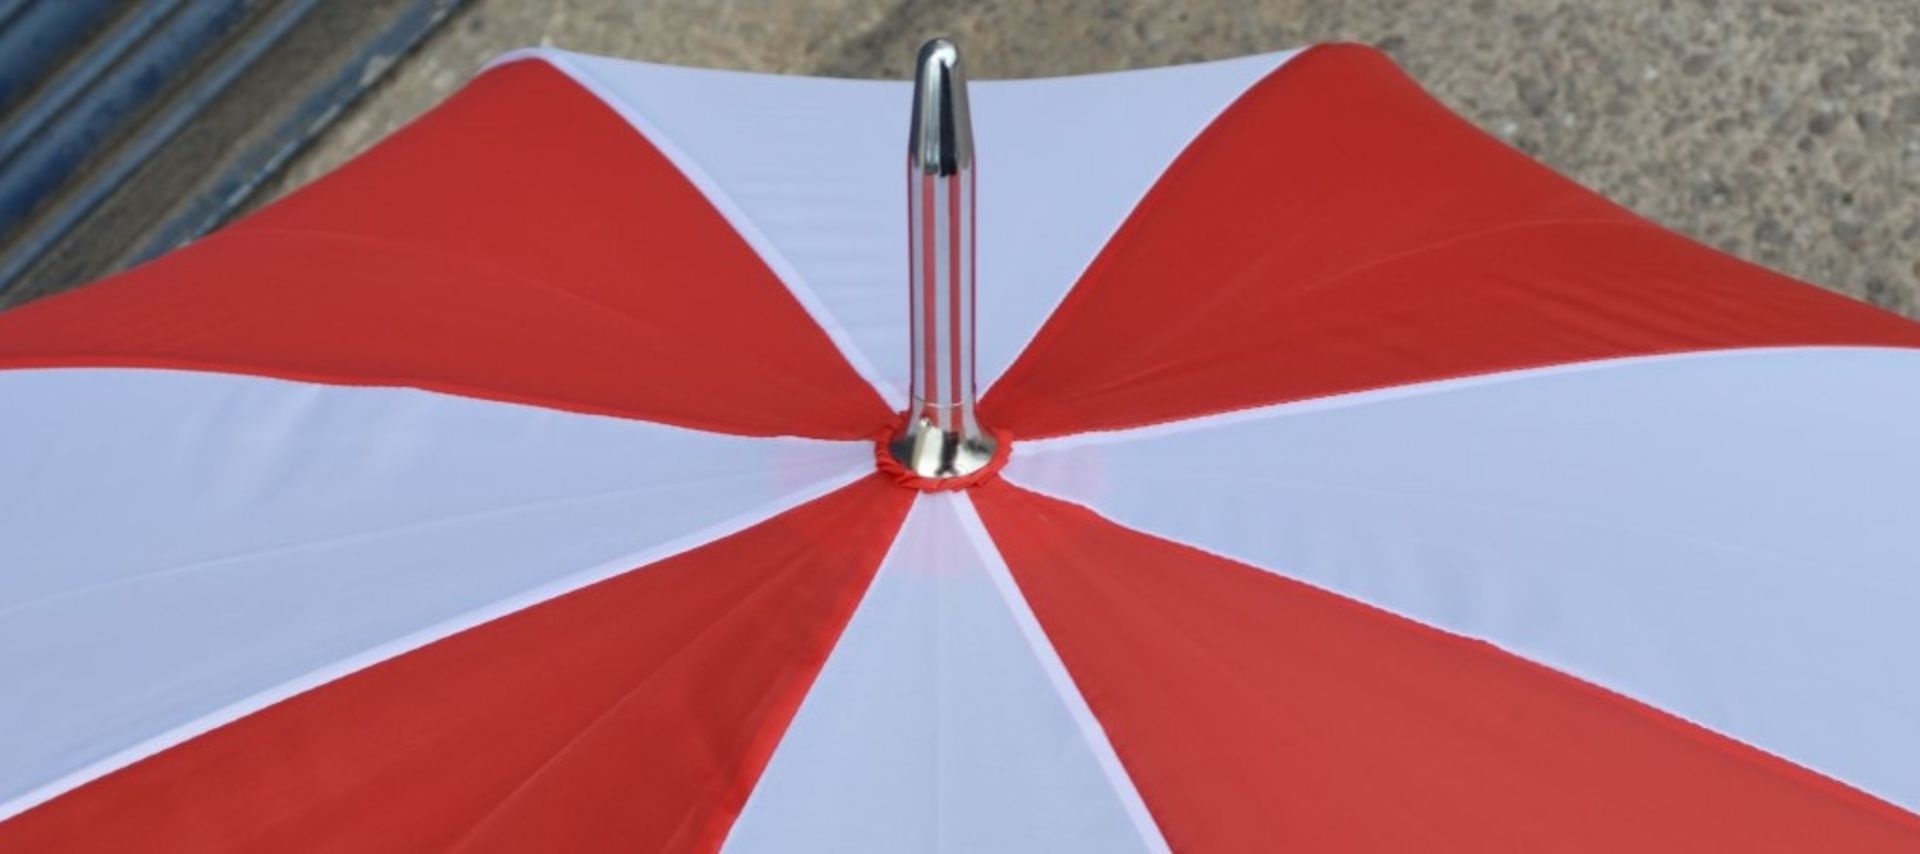 24 x Proline Golf Umbrellas - Colour: Red And White - Brand New Sealed Stock - Dimensions: Length - Image 5 of 5